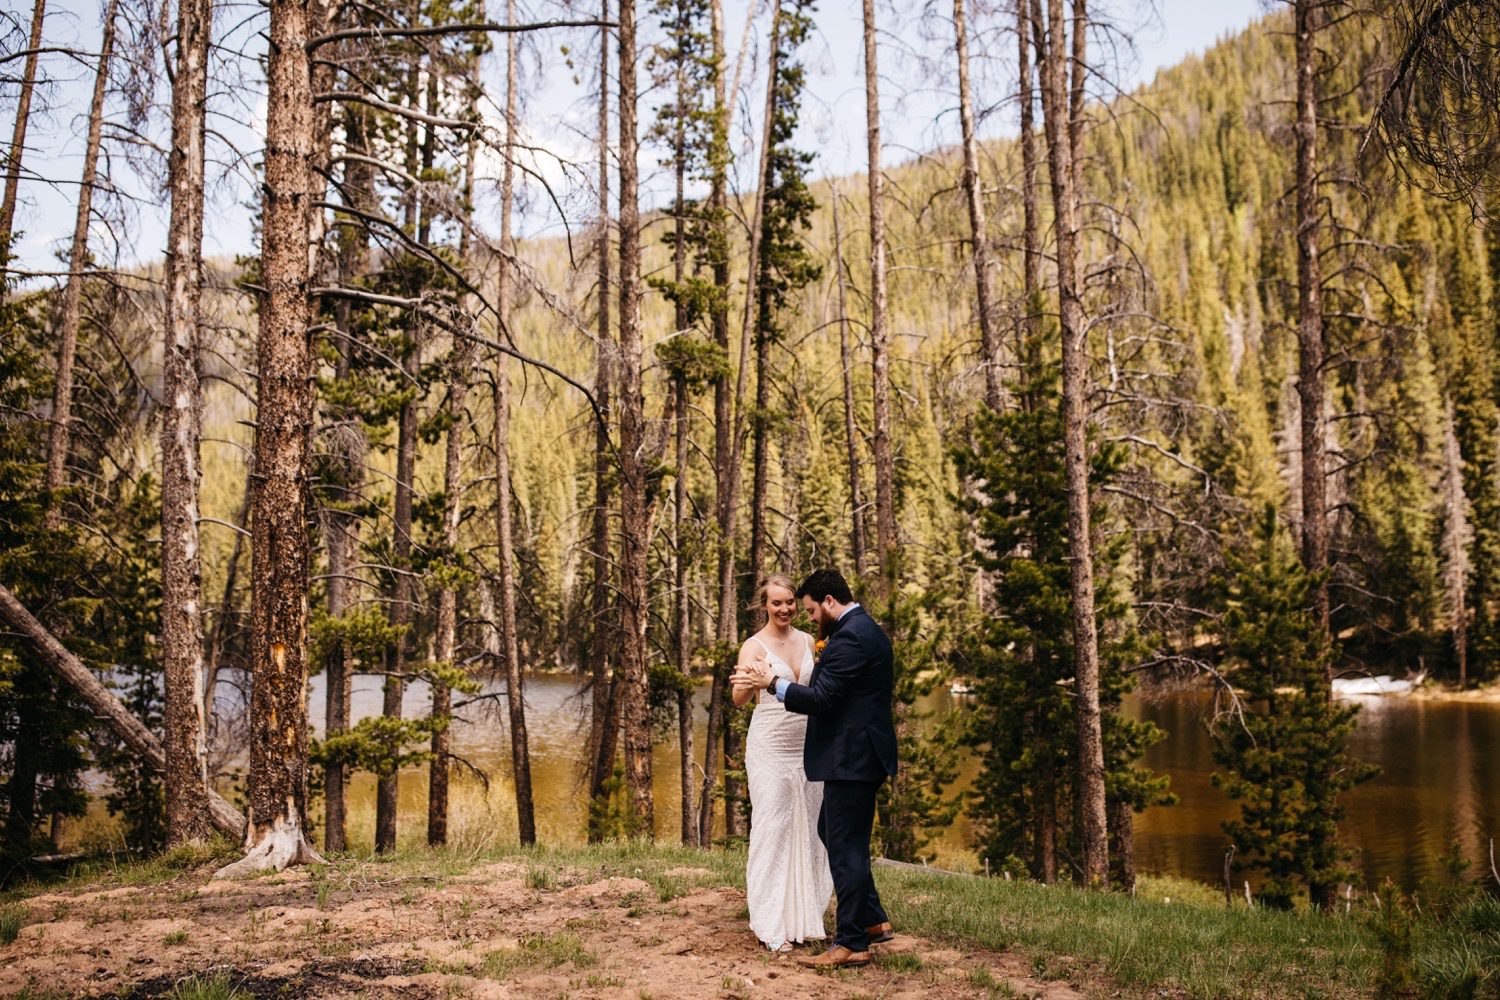 Piney River Ranch, Piney River Ranch Wedding, Piney River Ranch Vail Colorado, Colorado Mountain Wedding, Vail Colorado wedding, Vail wedding Photographer, Colorado mountain wedding photographer, Colorado wedding photographer, Vail Colorado photographer, Colorado wedding ideas, Colorado wedding inspiration, Mountain wedding, Boho wedding inspiration, first look, bride and groom first look 